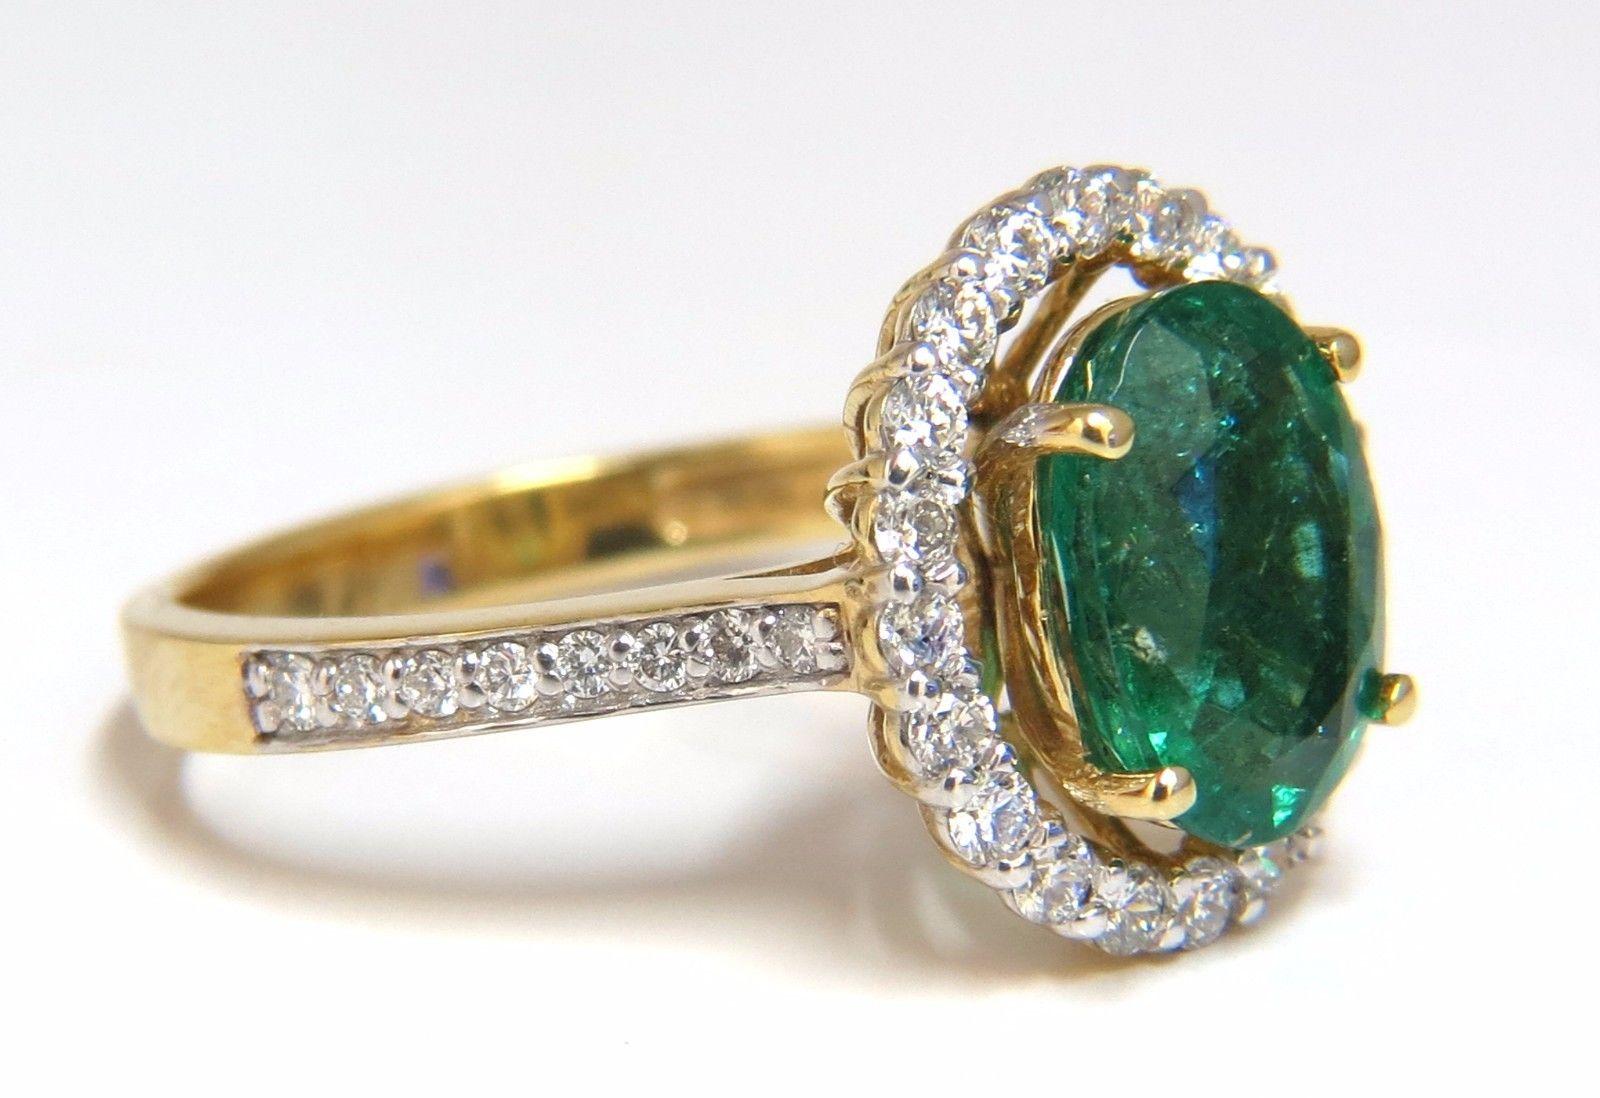 Venetian Mod Deco Green.

1.95ct. Natural Emerald Ring

9.8 X 6.9mm

Transparent & Vivid Green 

.66ct. Diamonds.

Round & full cuts 

G-color Vs-2 clarity.  

14kt. yellow gold

3.4 grams

Ring Current size: 7

Depth of ring: .3 inch

Deck of ring: